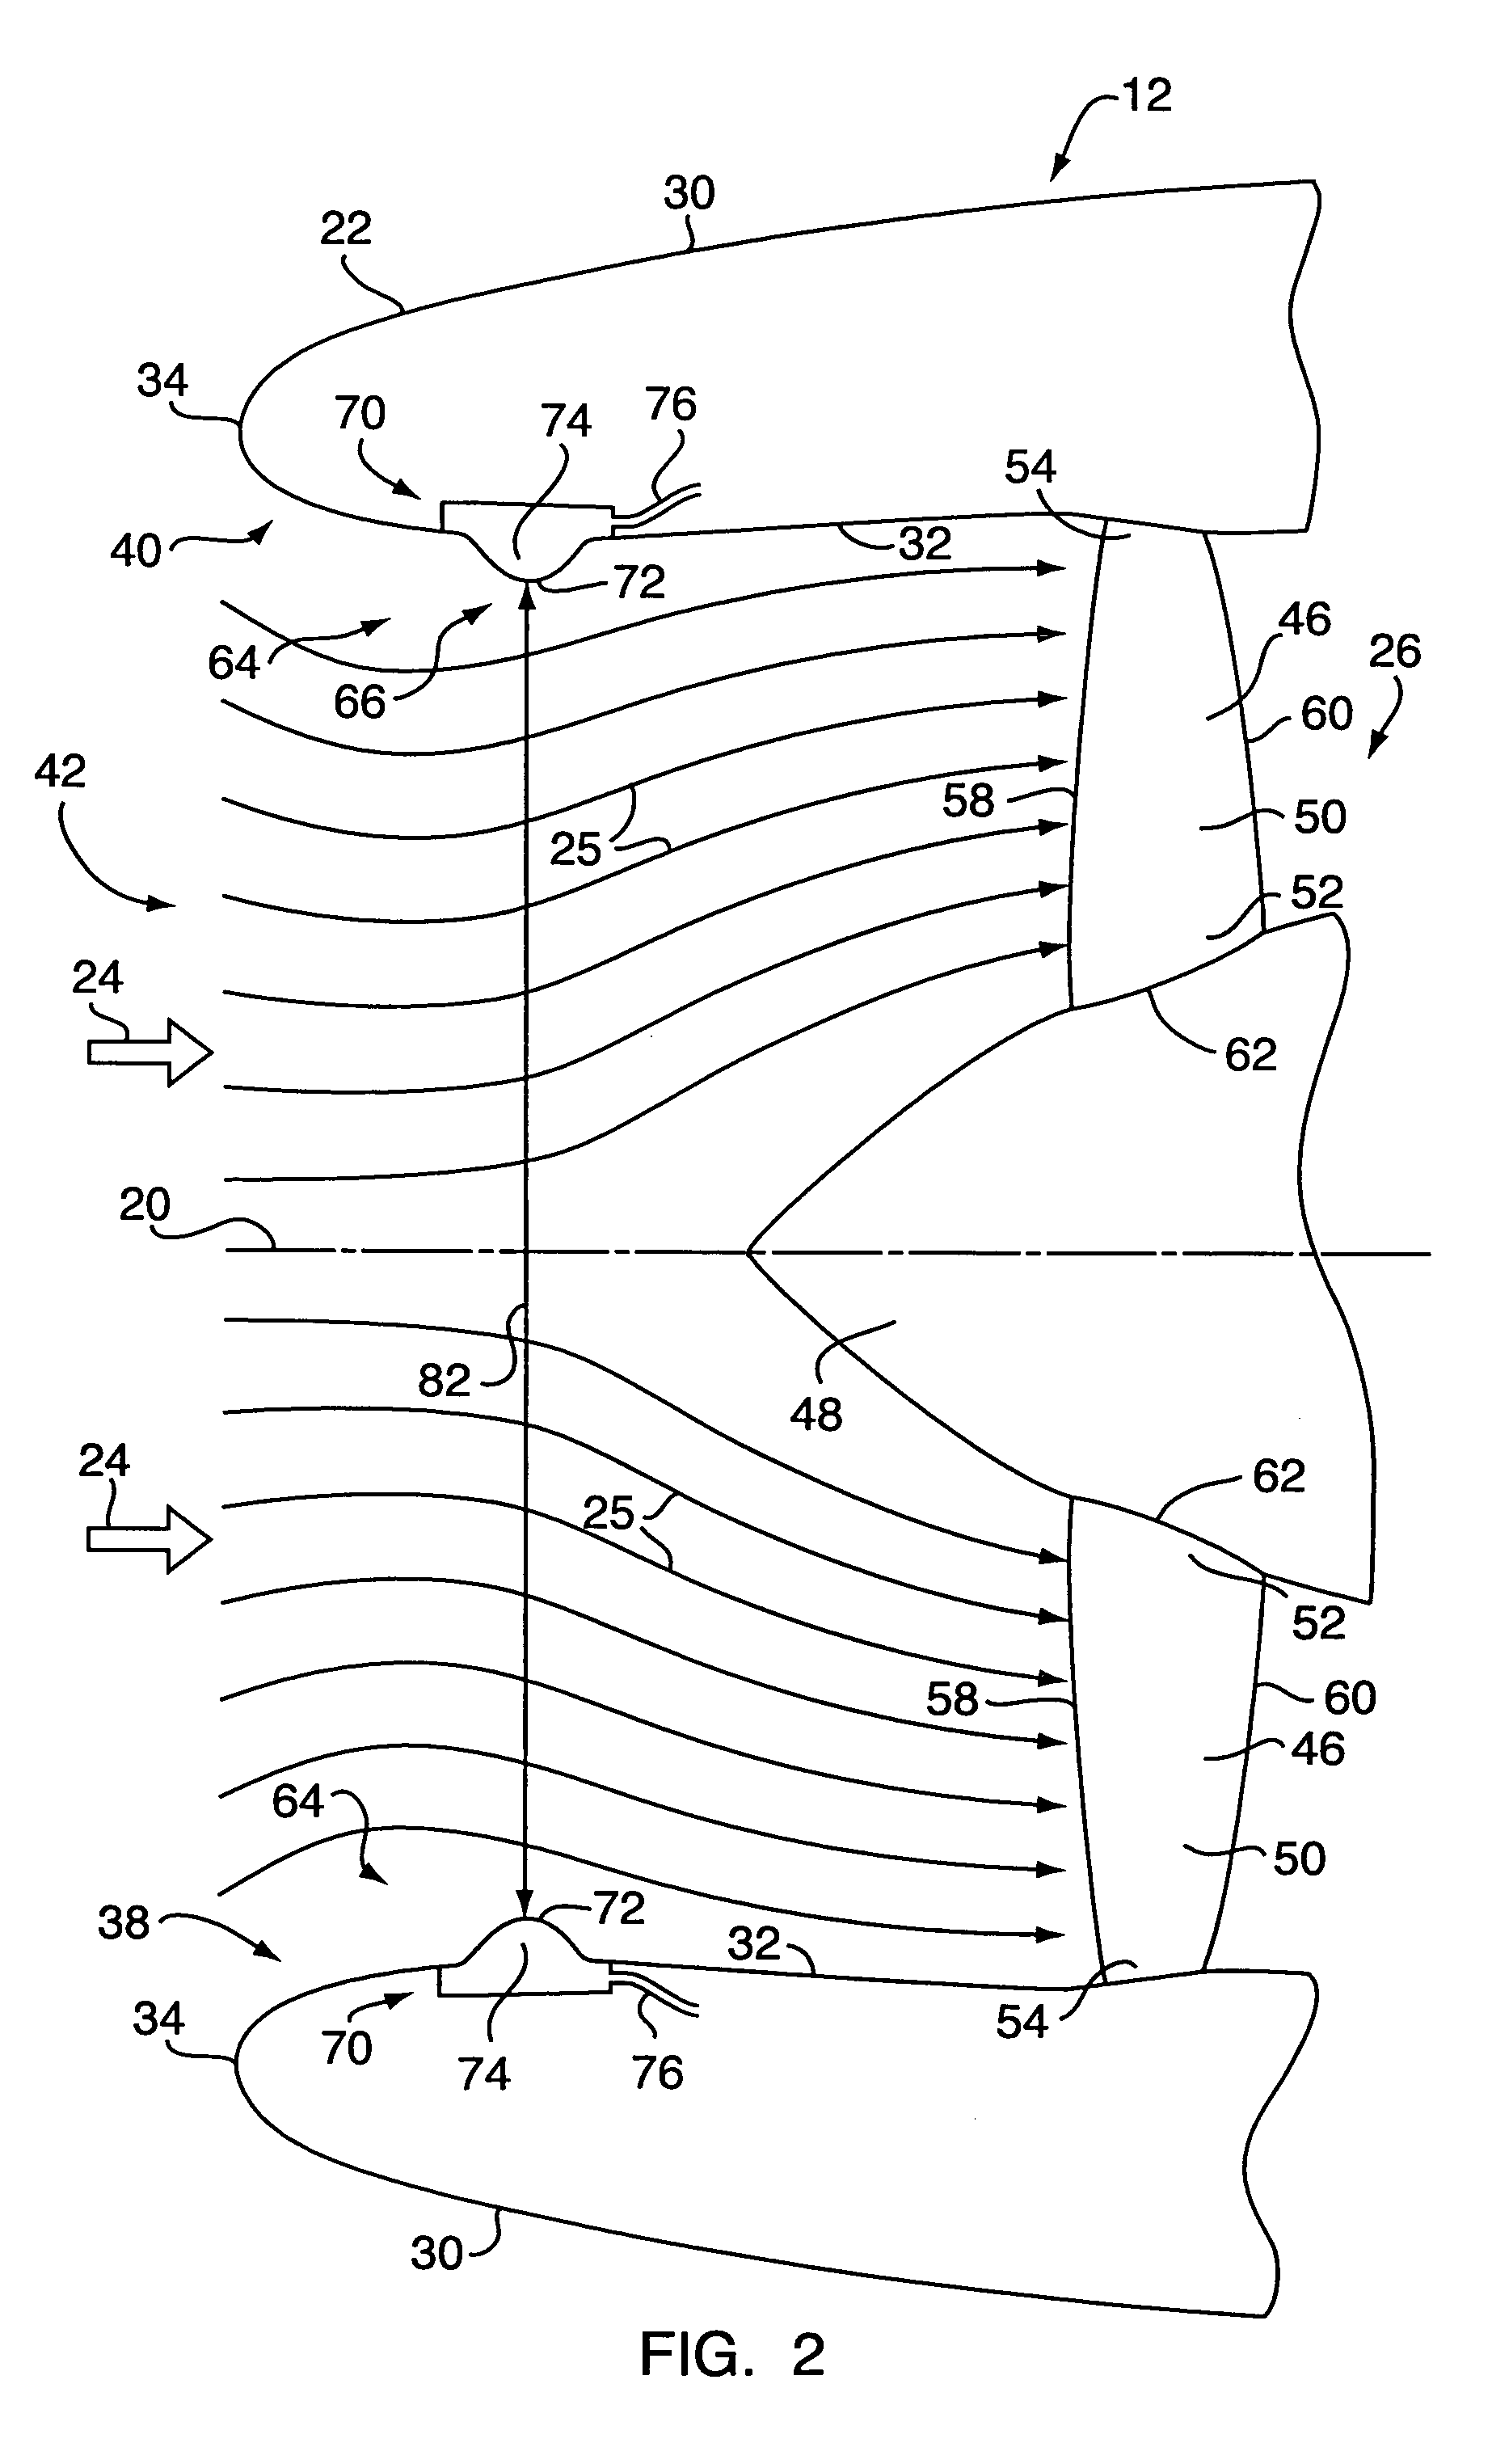 Gas turbine engine inlet with noise reduction features